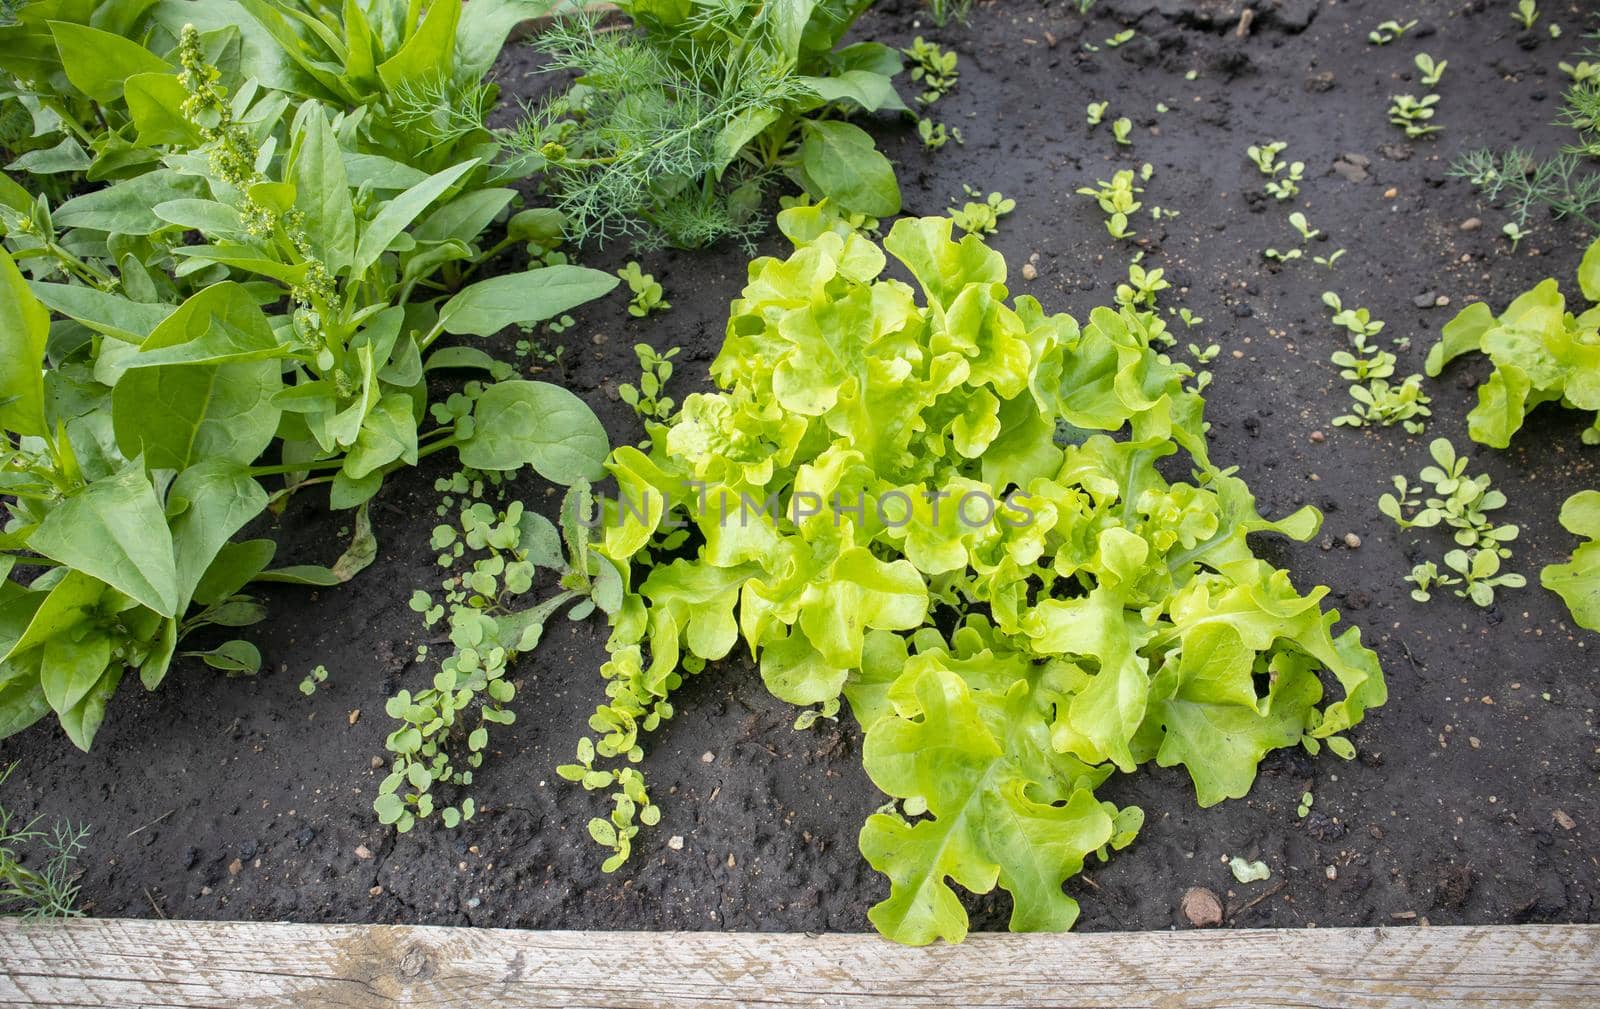 The greens of a young lettuce growing in rows on a bed with moist soil. The concept of organic gardening.